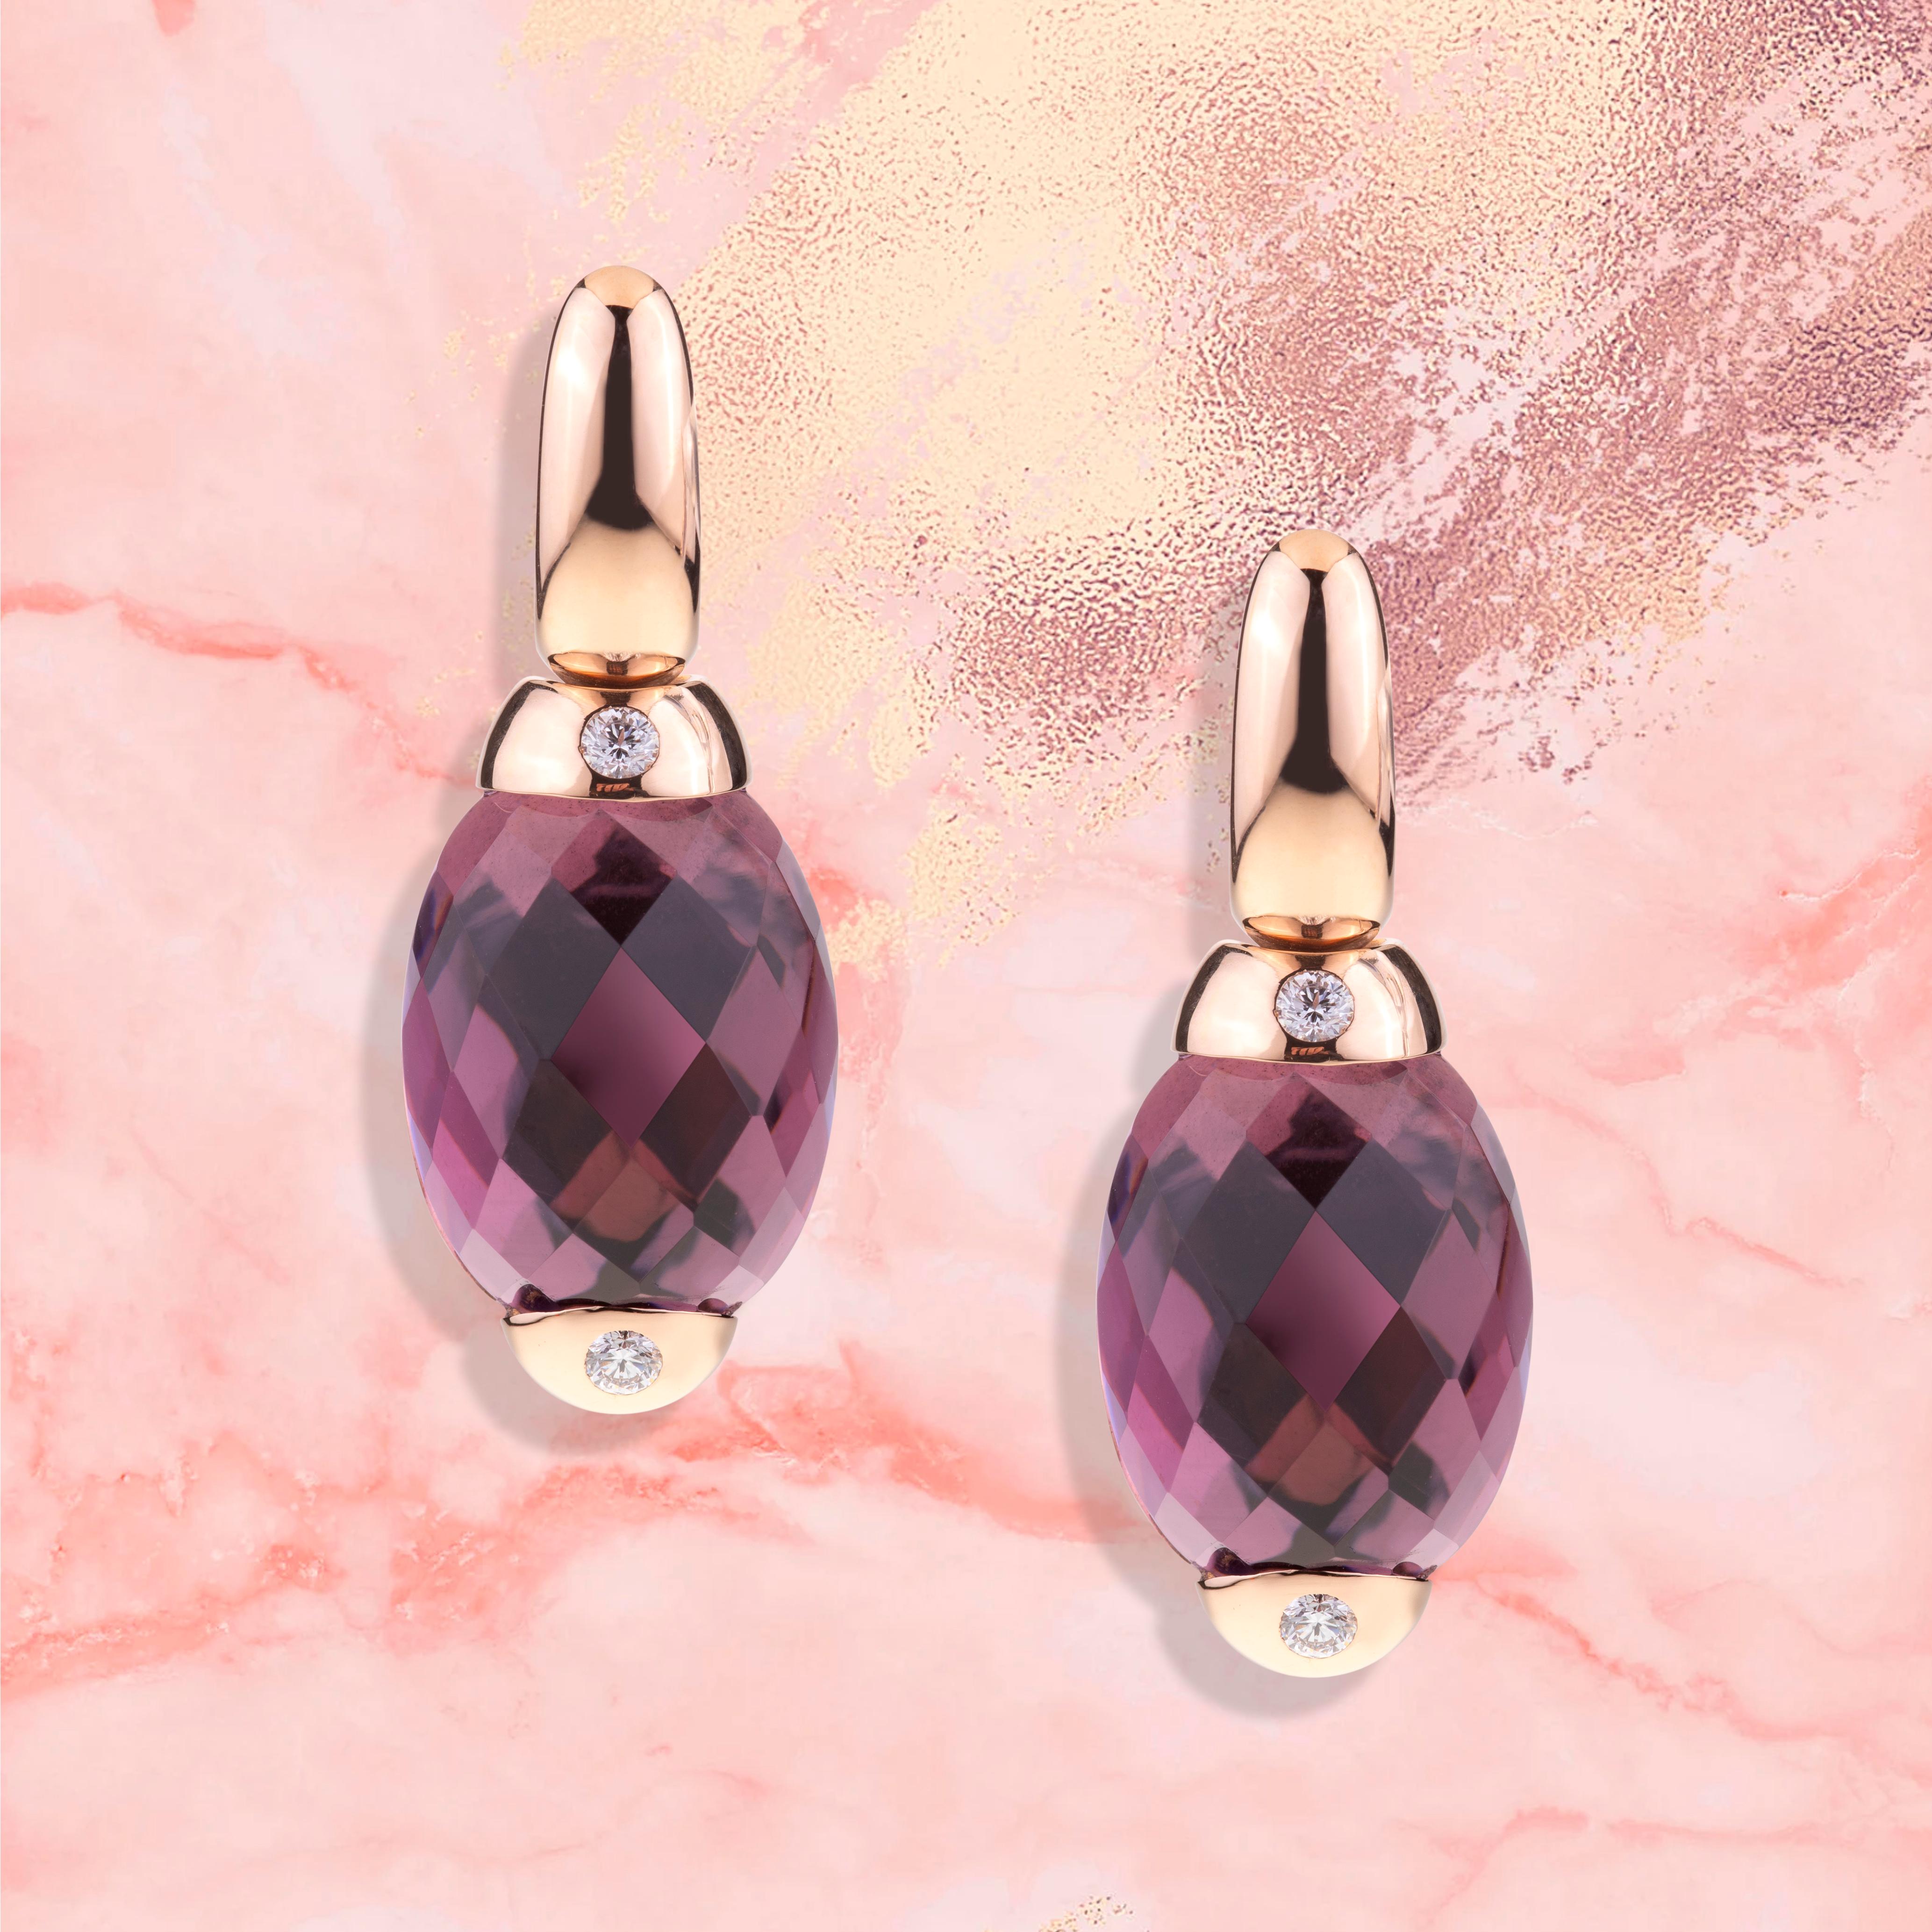 Embrace Collection by Angeletti. Rose Gold Earrings With Amethyst and Diamonds.
Iconic Embrace Model, Designed and Manifactured in Rome.
Four diamonds (ct. 0.32) are set on each side of the main stone, the purple Amethyst (ct.29.03). The weight of